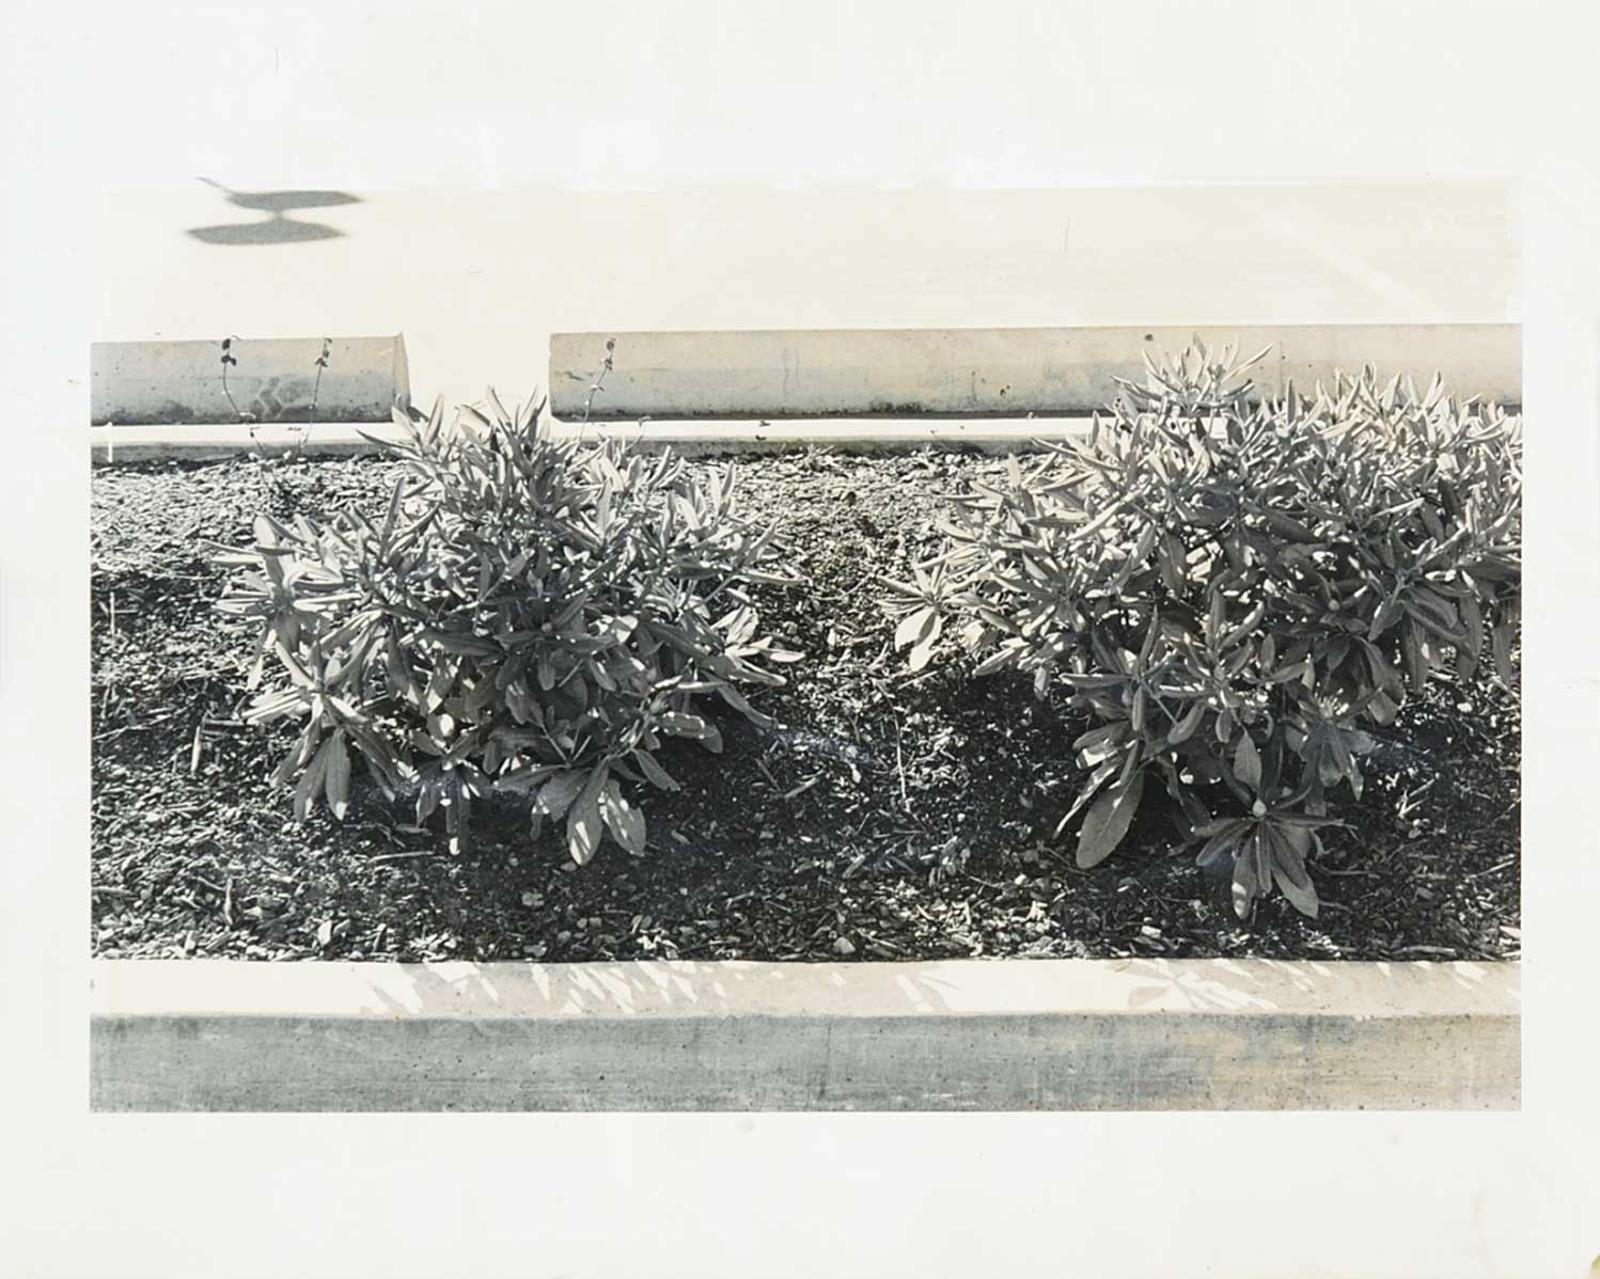 Donna Brunsdale - Untitled - View of Planters